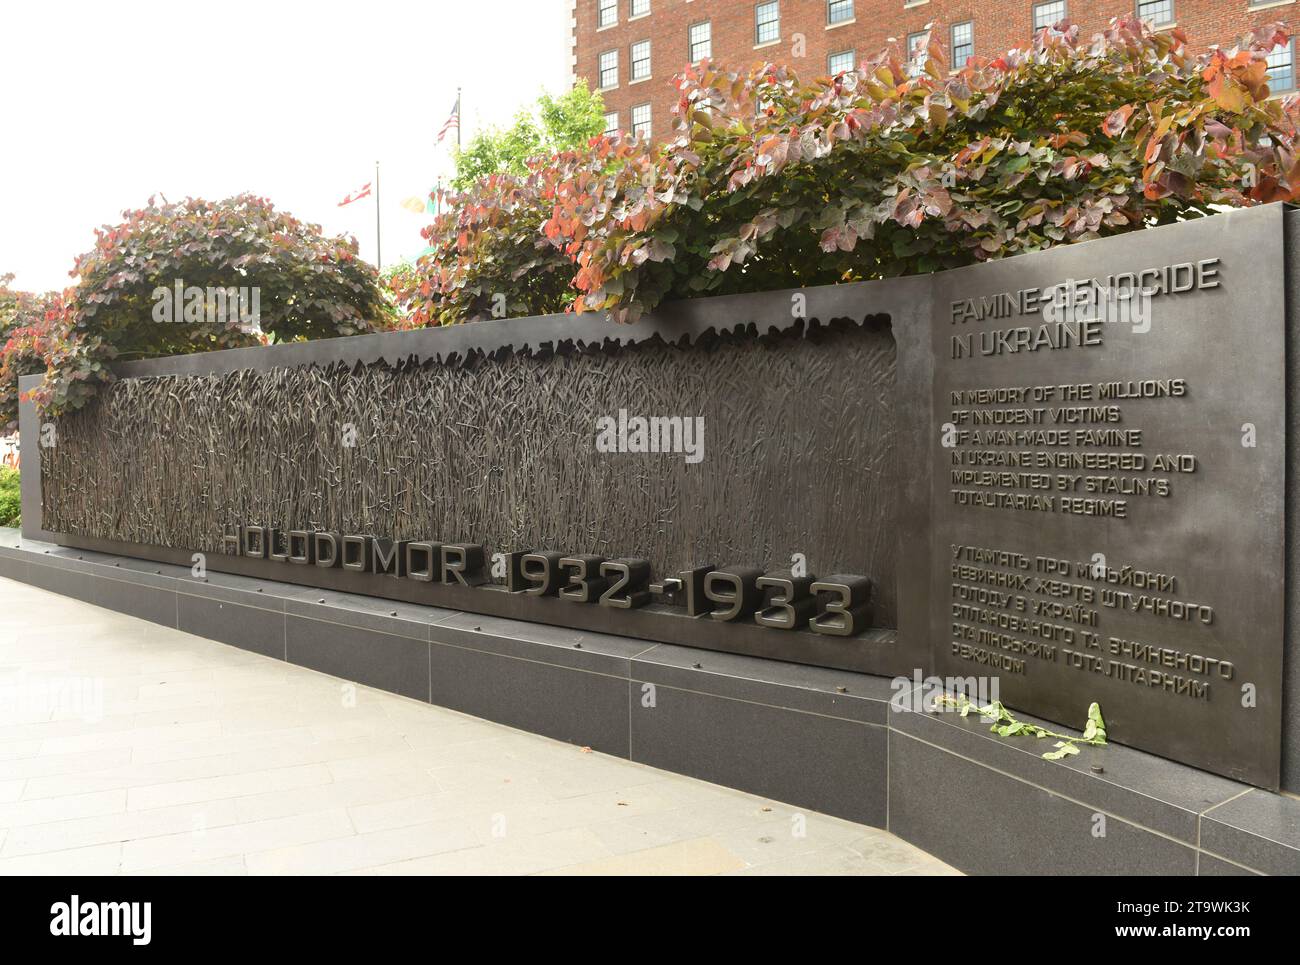 Washington, DC - June 01, 2018: Memorial of victims of the famine-genocide (Holodomor) of 1923-1933 years in the Ukraine in Washington, DC, USA. Stock Photo